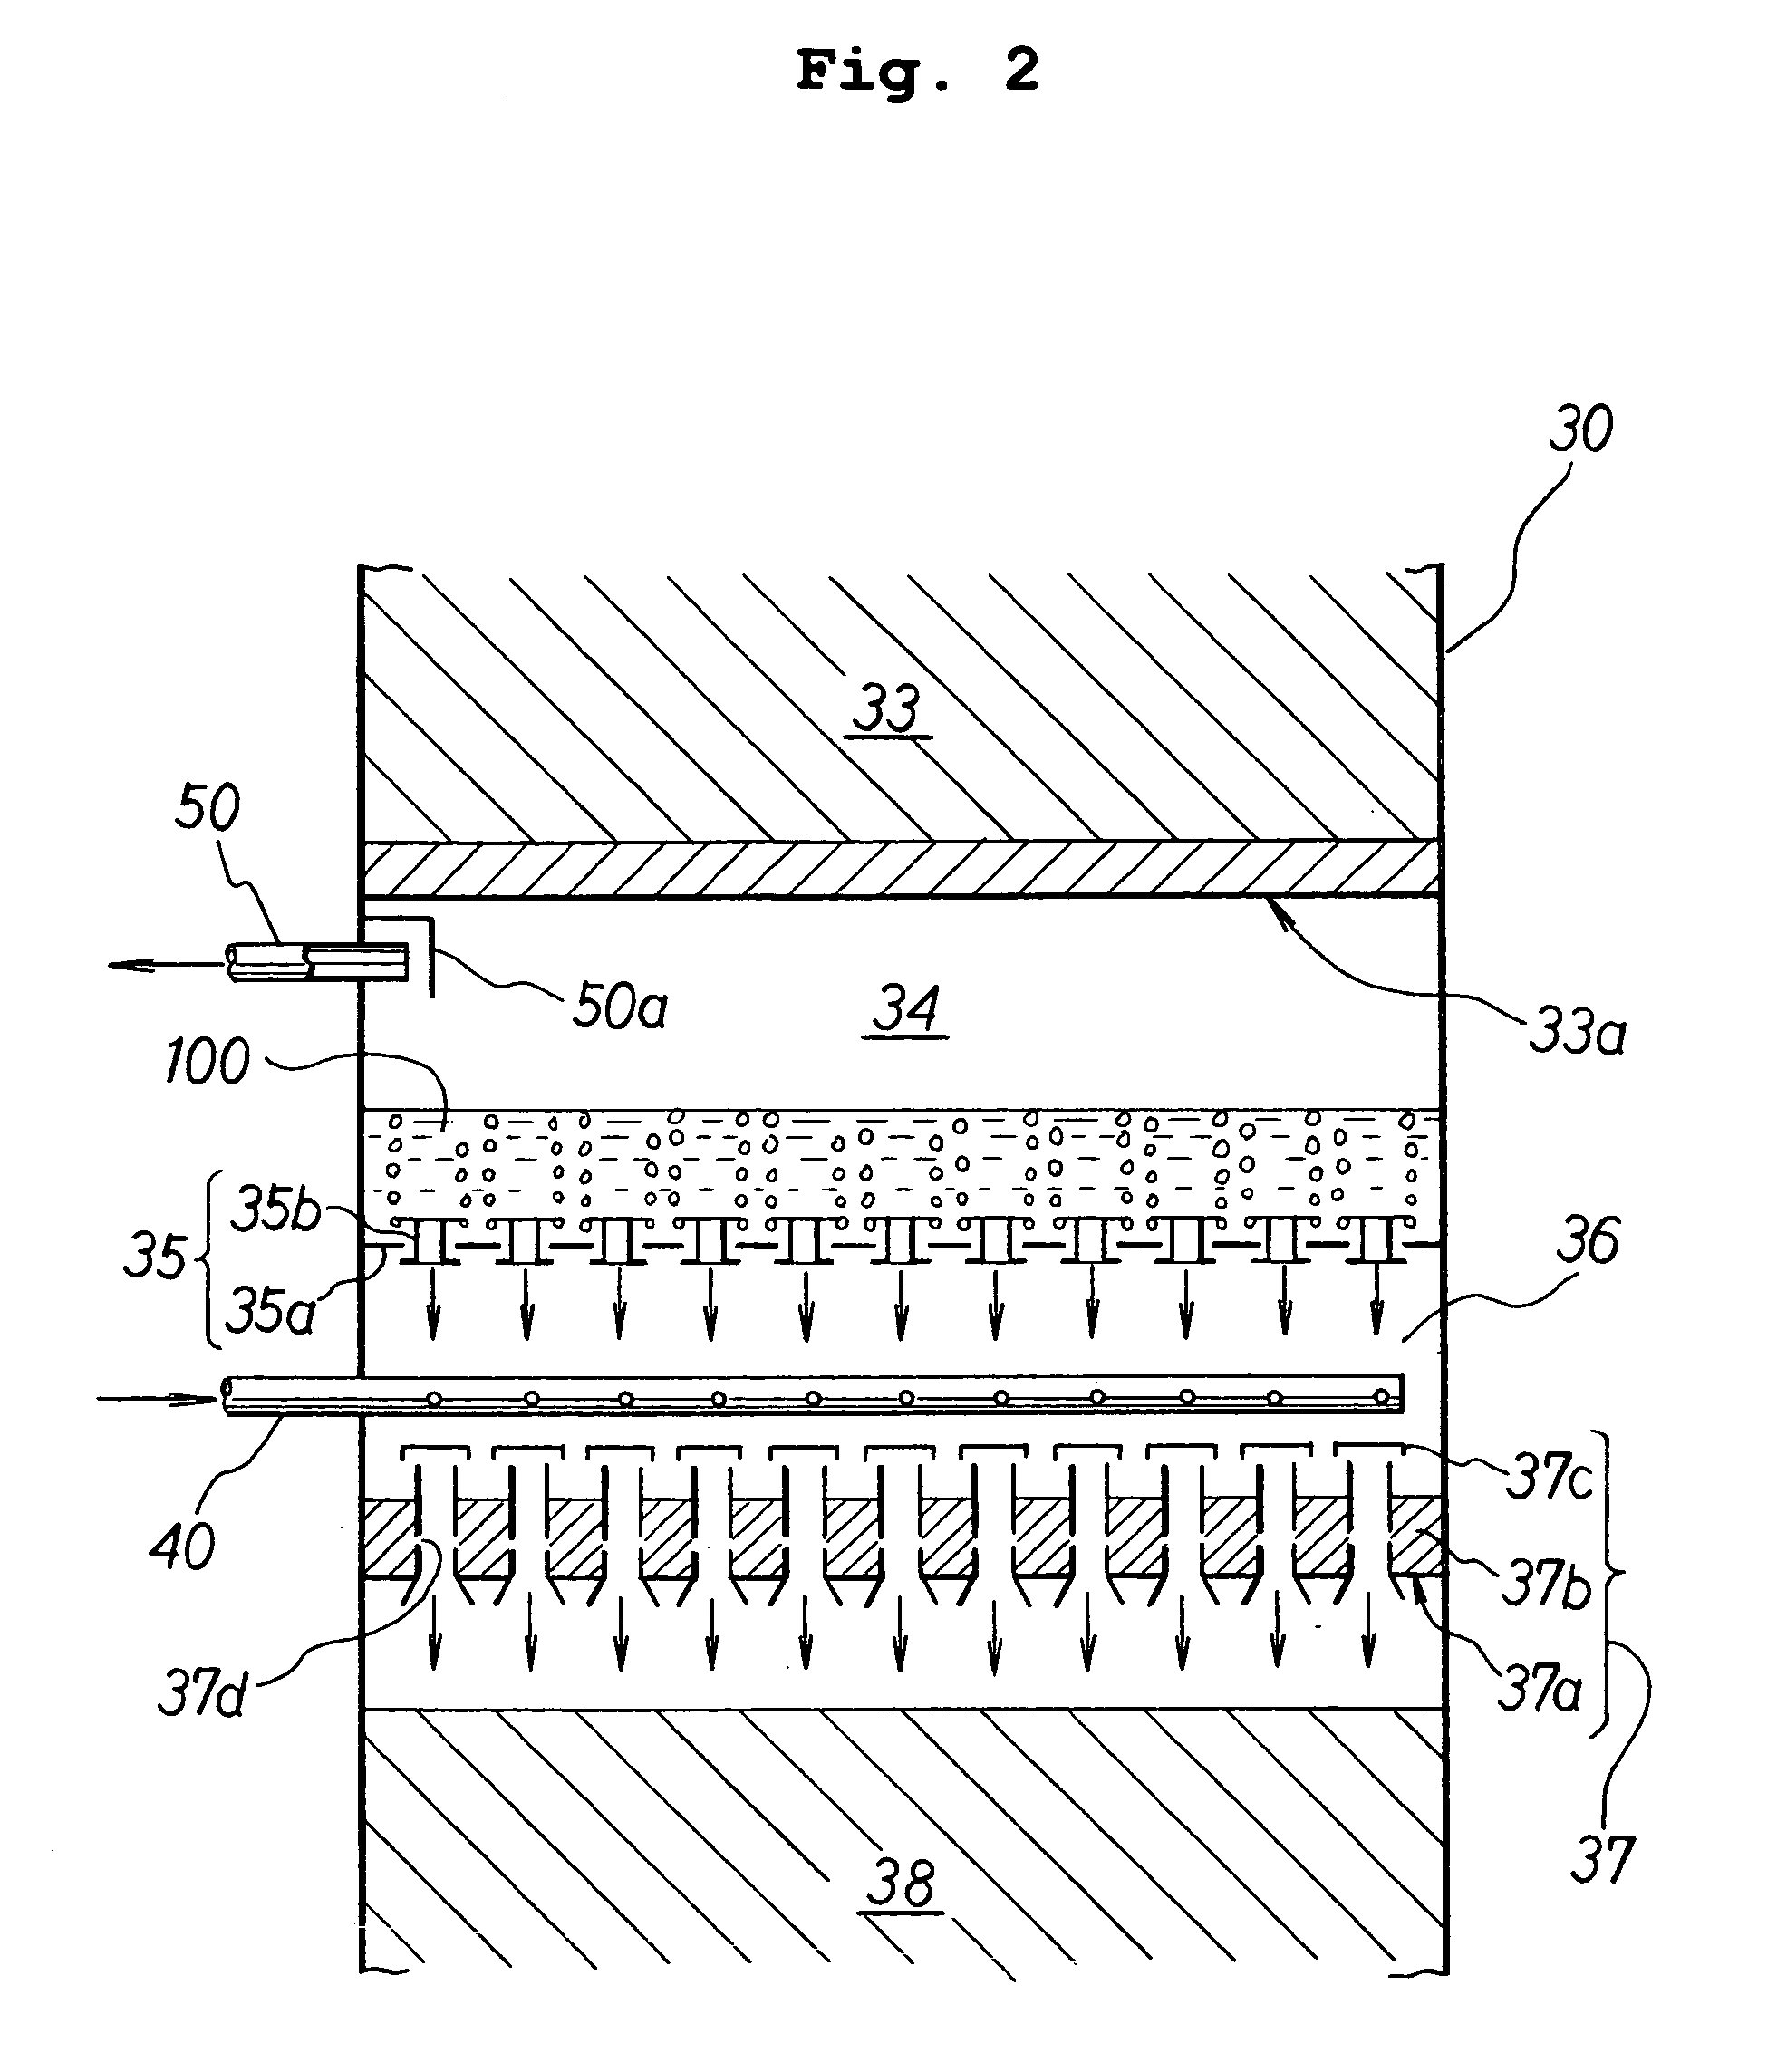 Method and apparatus for stripping sulfur-containing compounds from hydrocarbon feed stock in hydrorefining of petroleum distillates